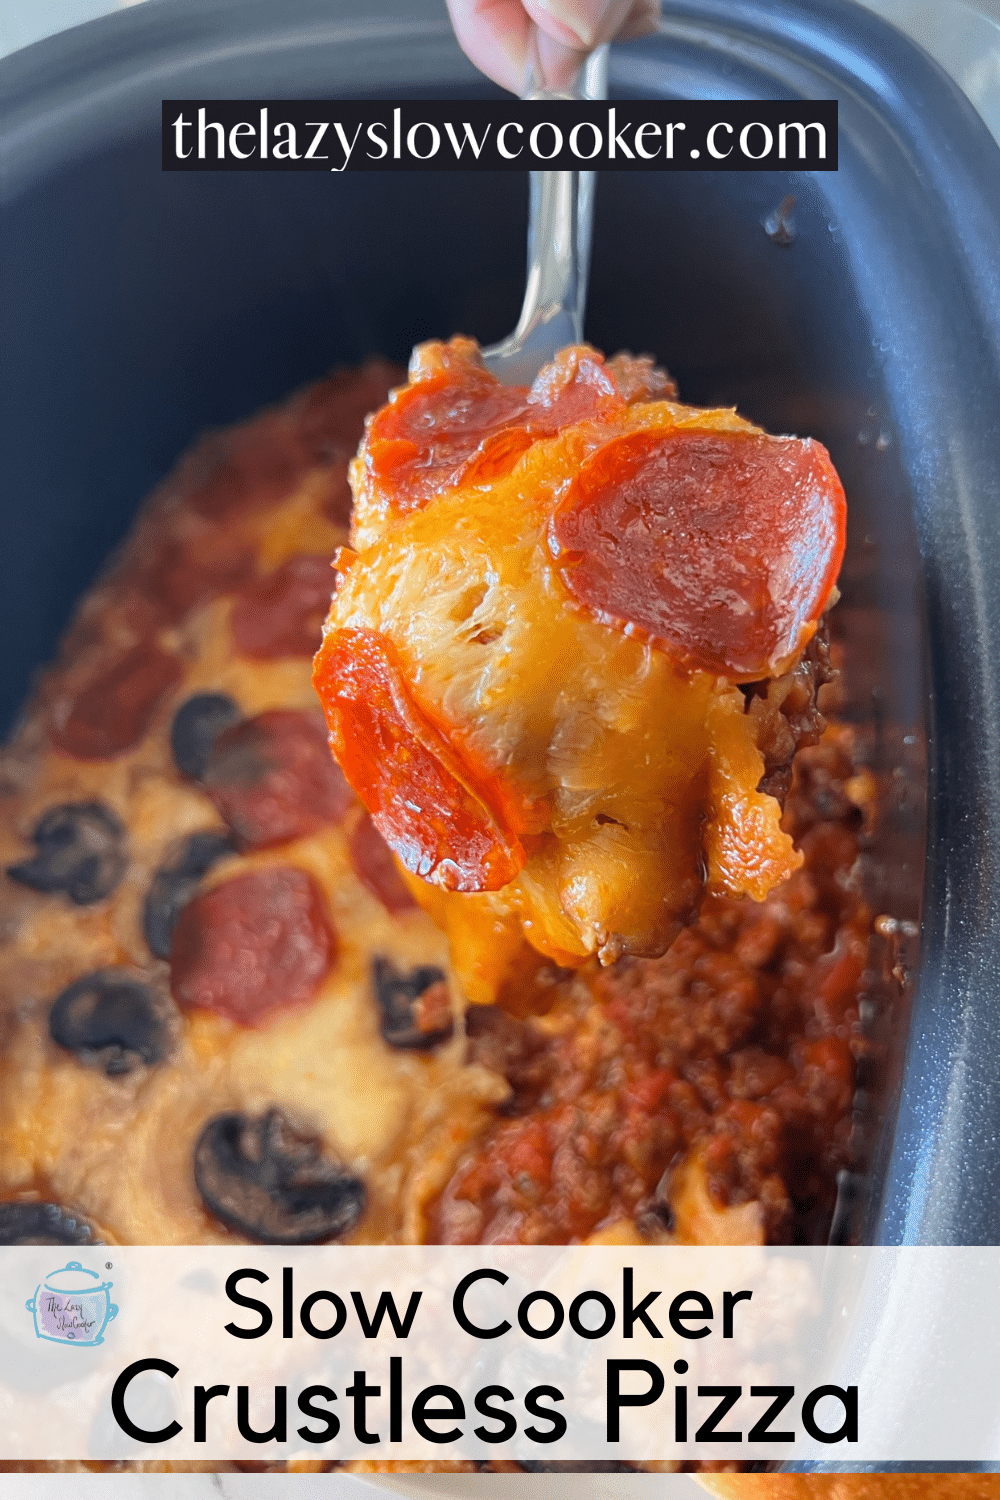 Slow Cooker Crustless Pizza Casserole - The Lazy Slow Cooker